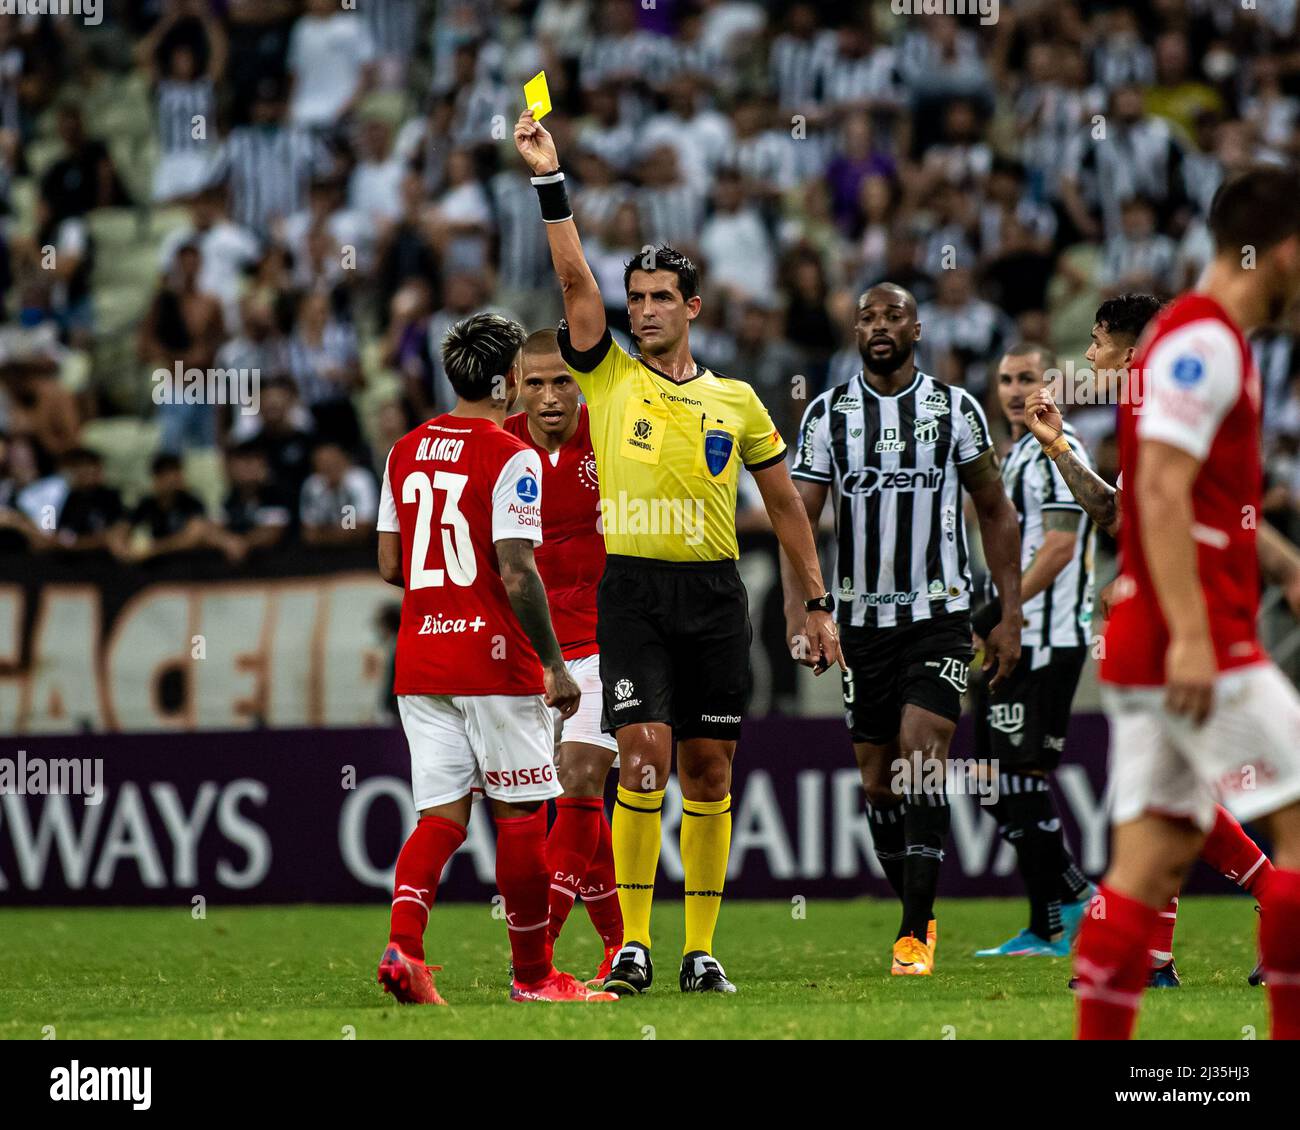 Fortaleza, Brazil. 05th Apr, 2022. CE - Fortaleza - 04/05/2022 - COPA SOUTH AMERICANA 2022, CEARA X INDEPEDIENTE - Referee Gonzalez Cabrera during a match between Ceara and Independiente at the Arena Castelao stadium for the Copa Sudamericana 2022 championship. Photo: Pedro Chaves/AGIF/Sipa USA Credit: Sipa USA/Alamy Live News Stock Photo